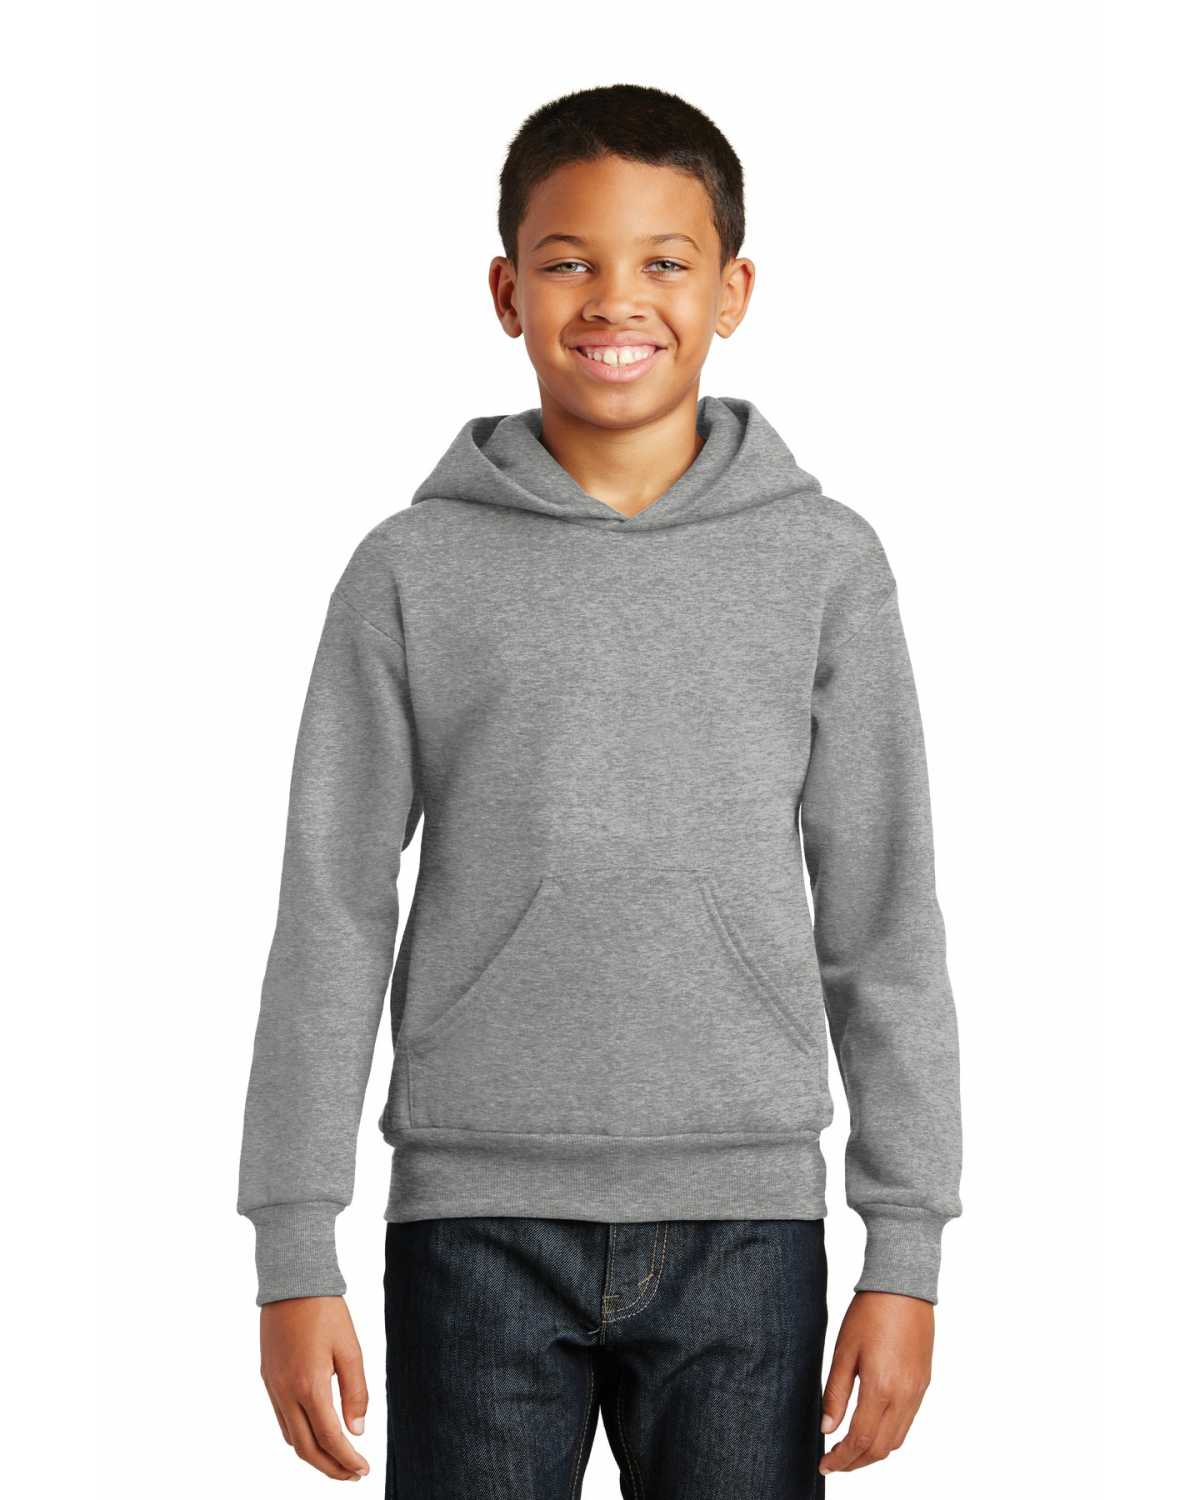 Hanes P470 Youth EcoSmart Pullover Hooded Sweatshirt on discount ...